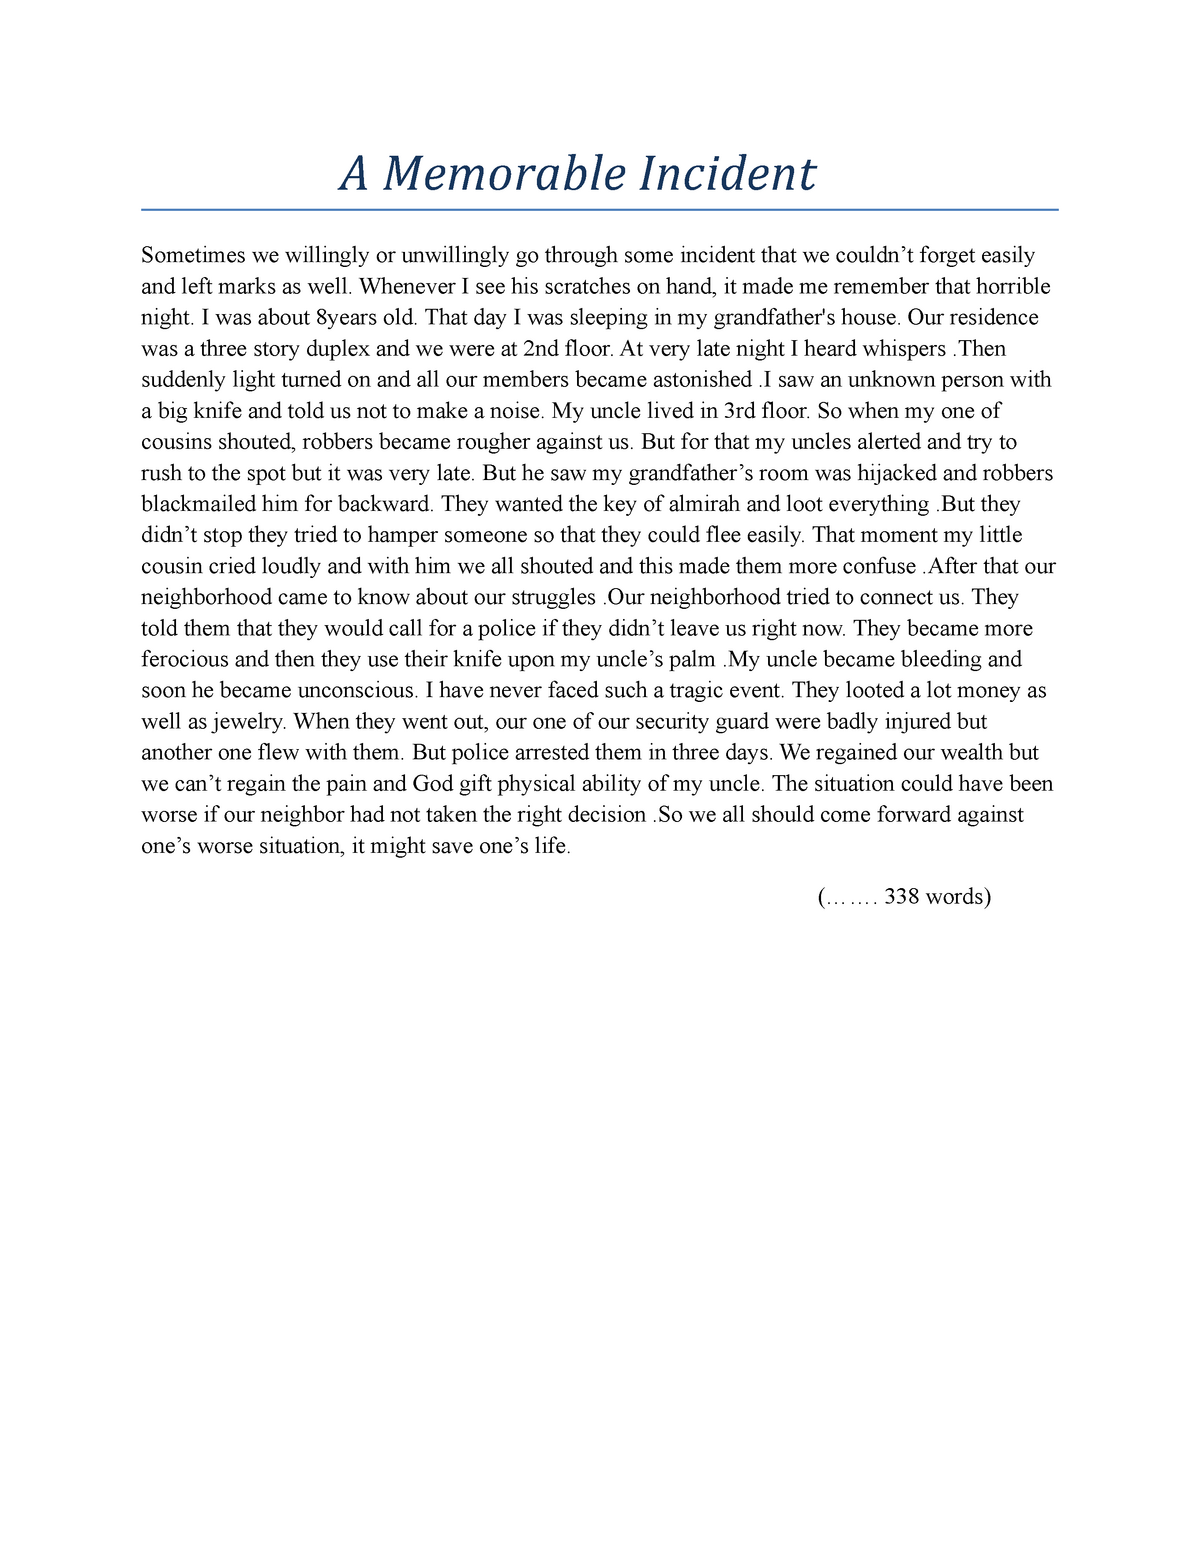 essay on an unforgettable incident for class 7